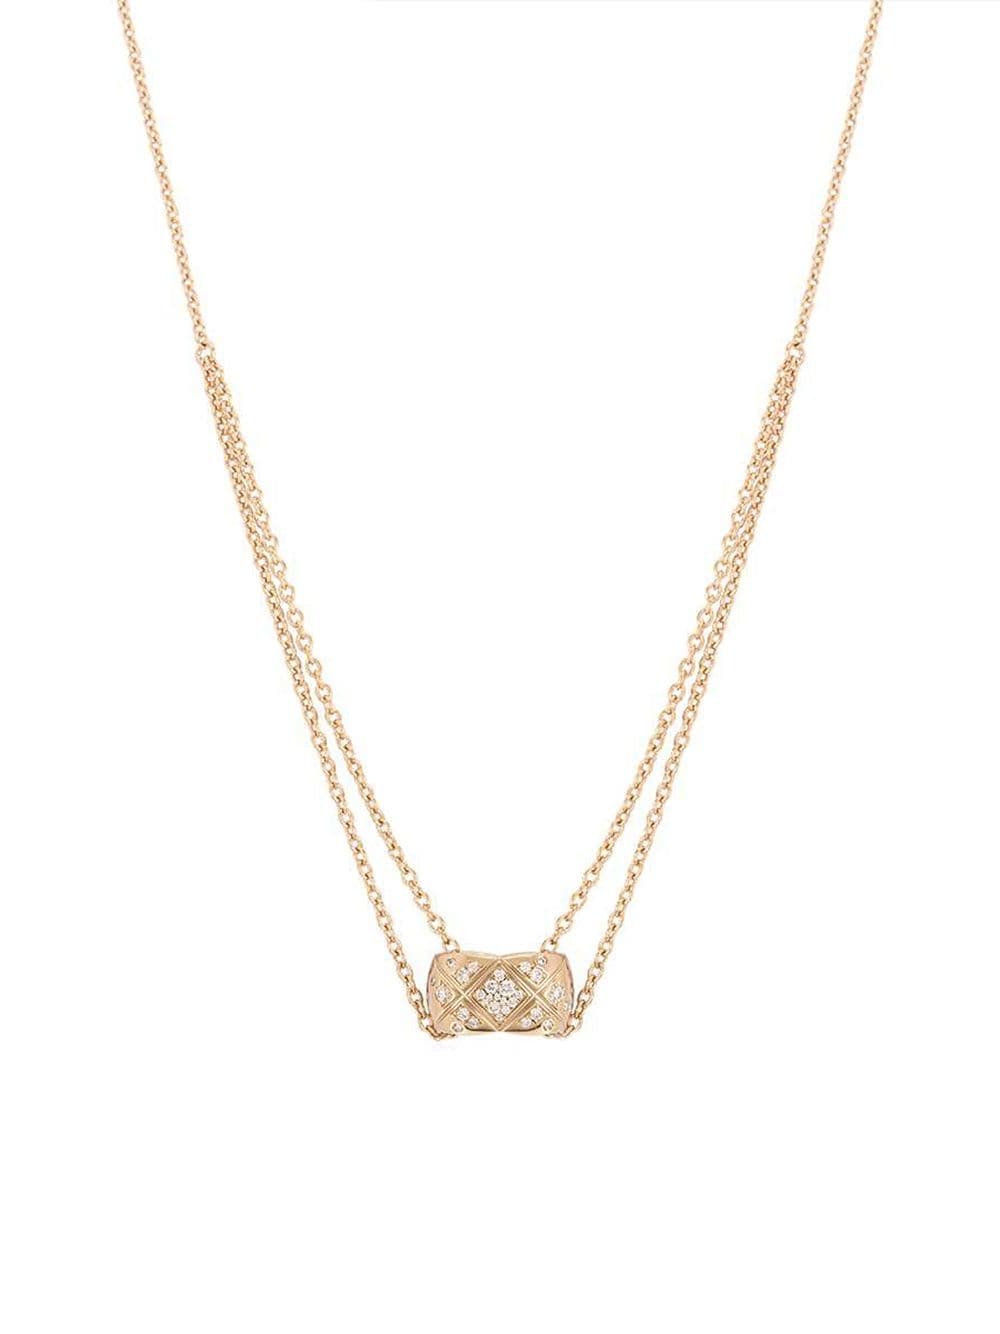 Coco Crush Necklace by Chanel